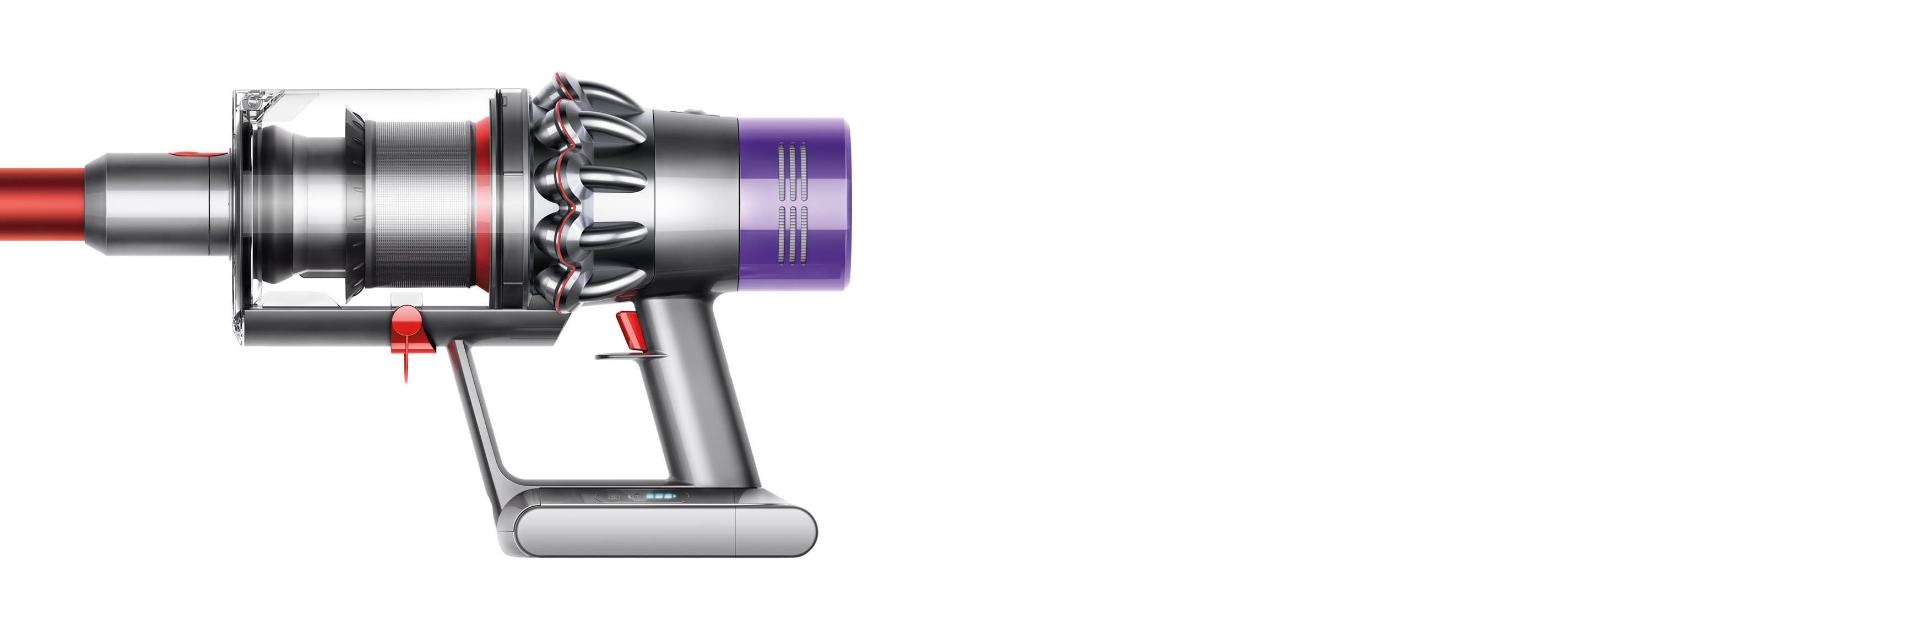 Dyson Cyclone V10™ vacuum handle and cyclone pack